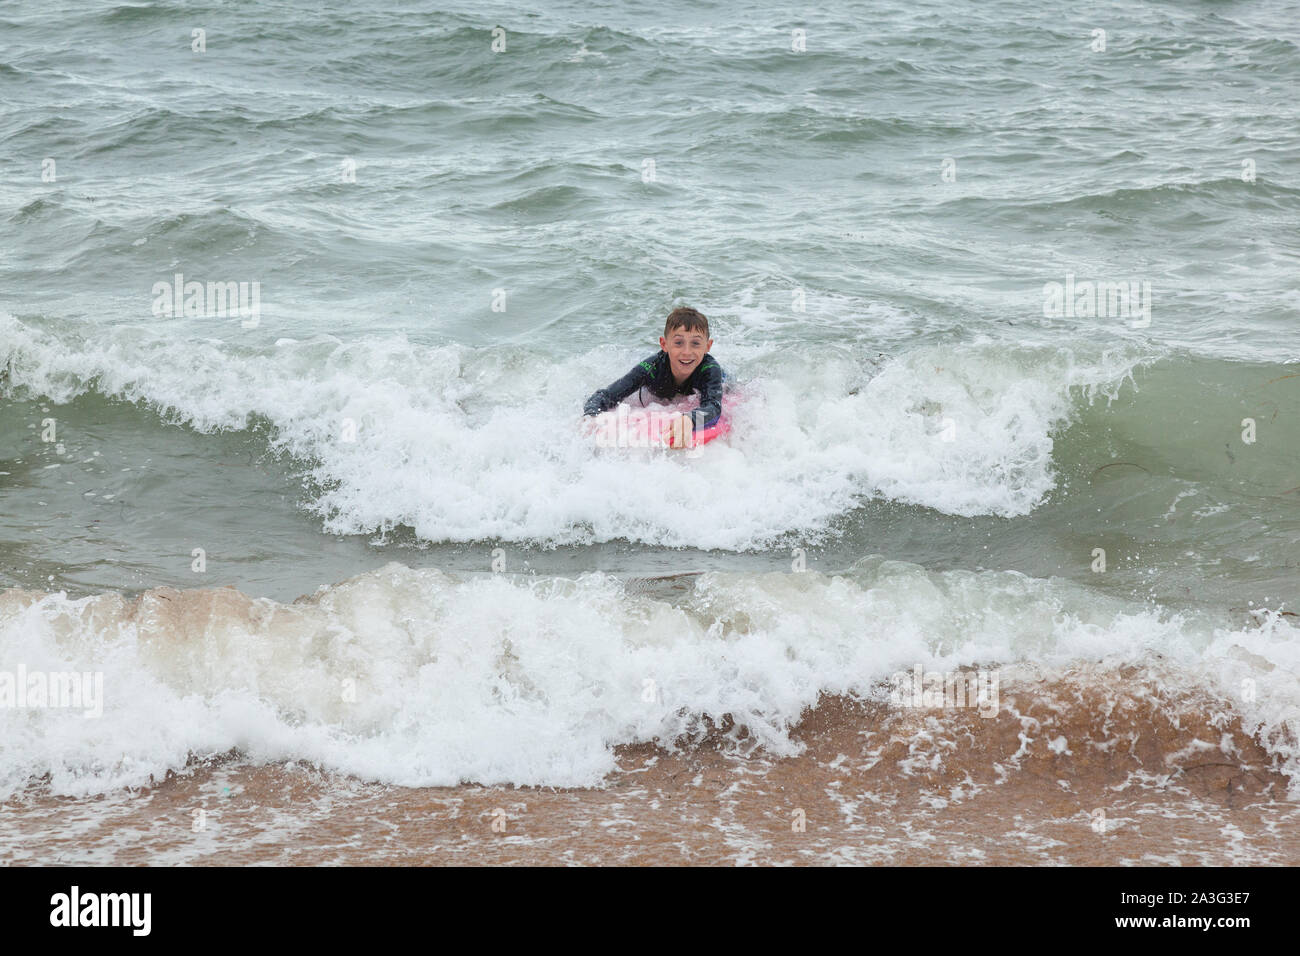 Ten year old boy surfing at Outer Hope Cove, Mouthwell sands beach, Kingsbridge, Devon, England, United Kingdom. Stock Photo